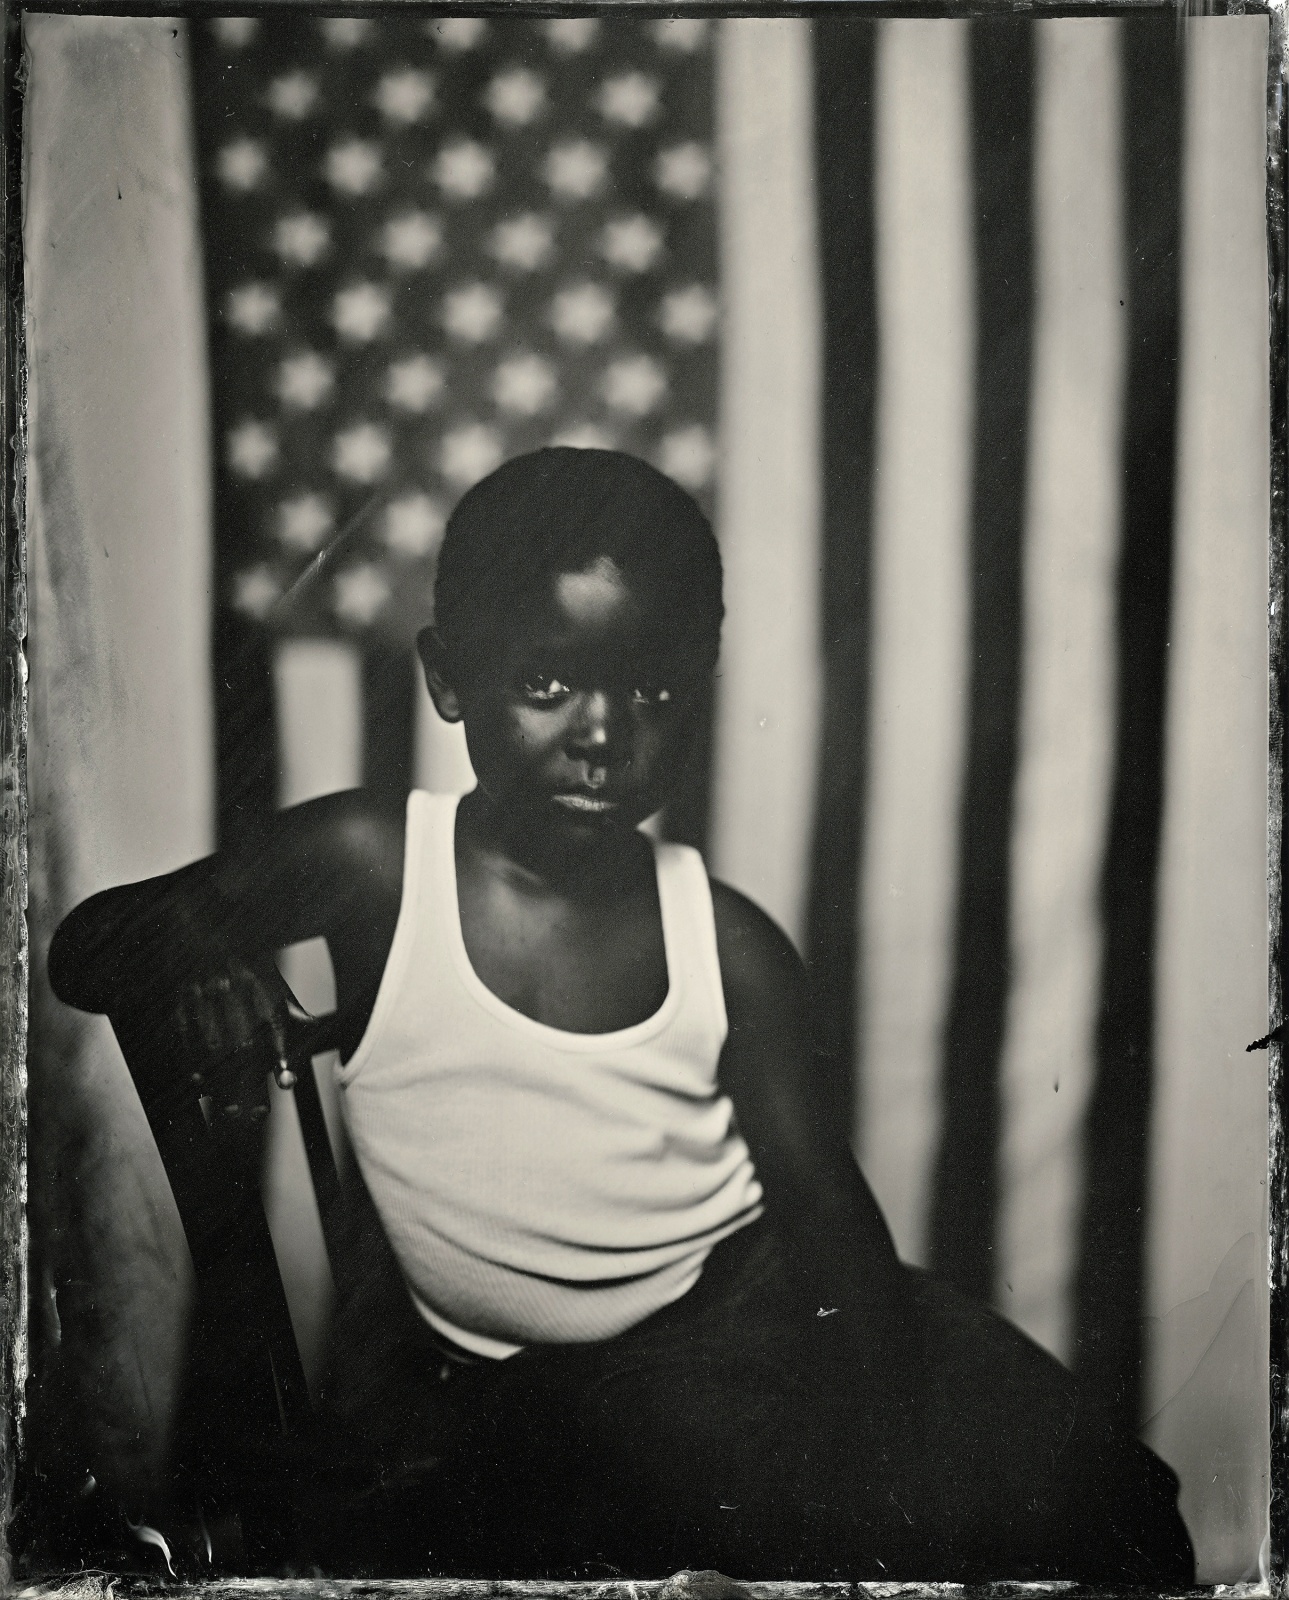 A Black child sits in front of the American flag and looks into the camera in this black and white photograph